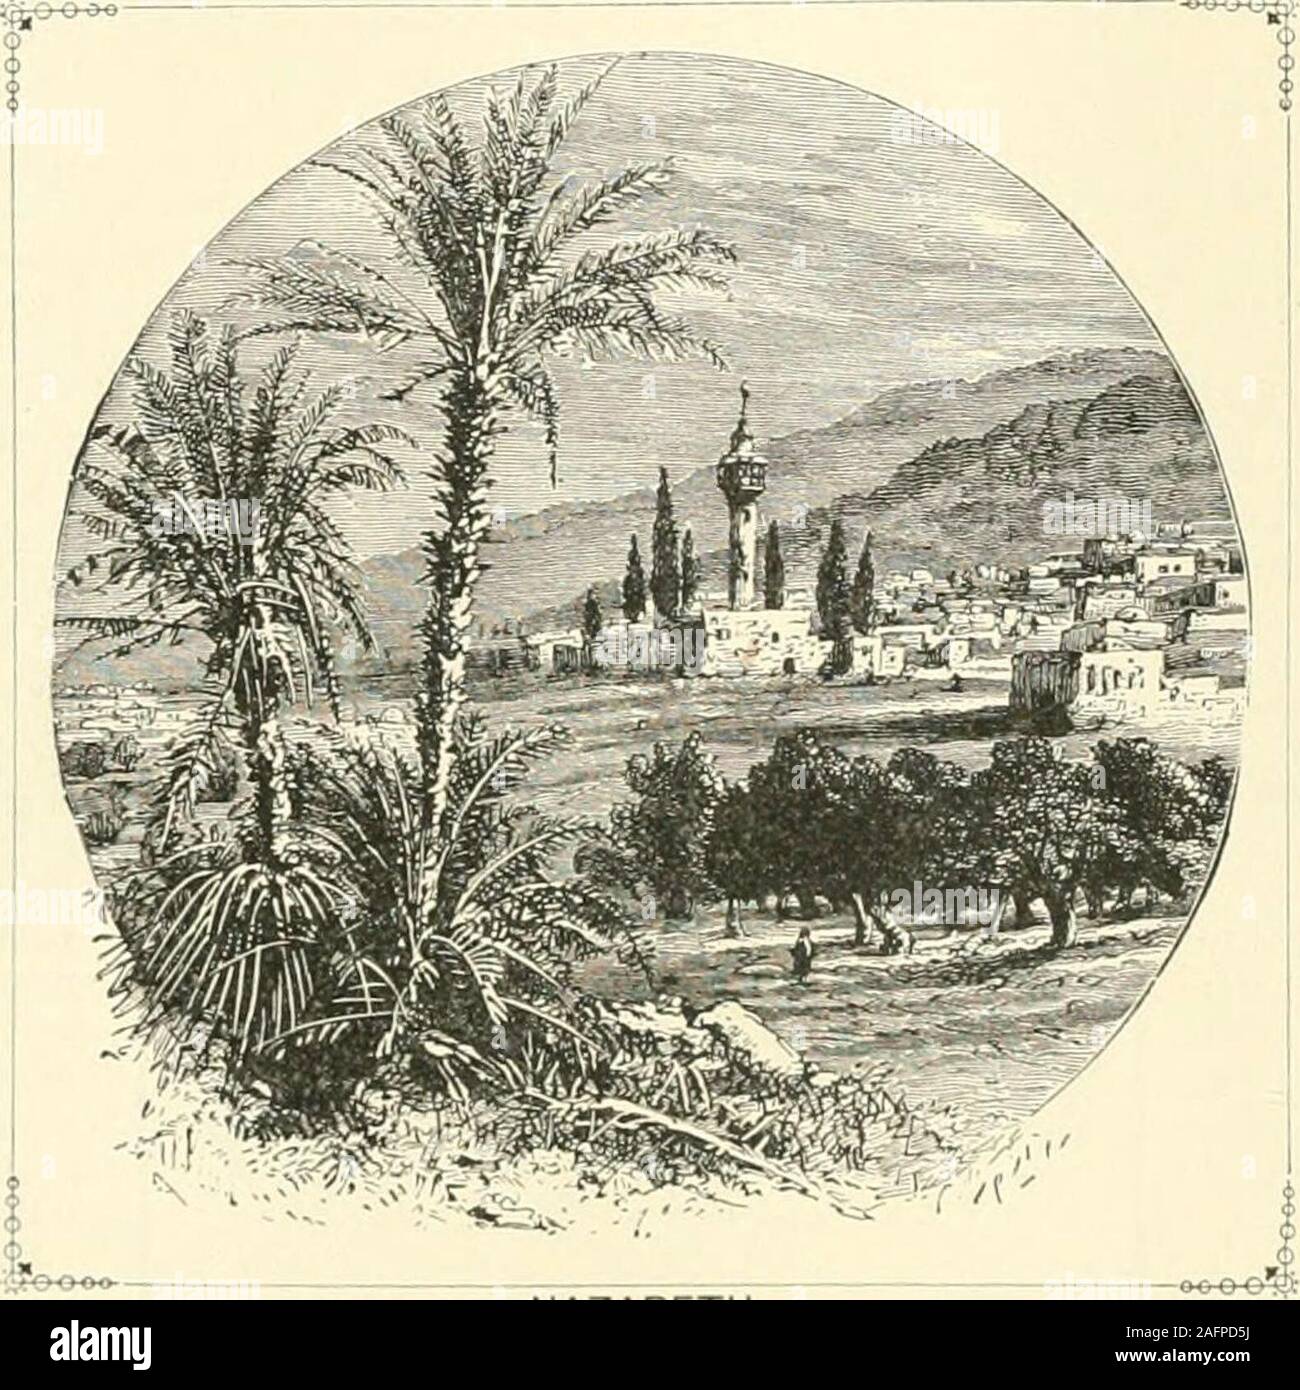 . Hill's album of biography and art : containing portraits and pen-sketches of many persons who have been and are prominent as religionists, military heroes, inventors, financiers, scientists, explorers, writers, physicians, actors, lawyers, musicians, artists, poets, sovereigns, humorists, orators and statesmen, together with chapters relating to history, science, and important work in which prominent people have been engaged at various periods of time. mete, it shall be mea.s-ured to you again.—Matthew vii., 1. 3. Axk. and it shall be given you; seek and ye shallAnd; knock, and it shall be o Stock Photo